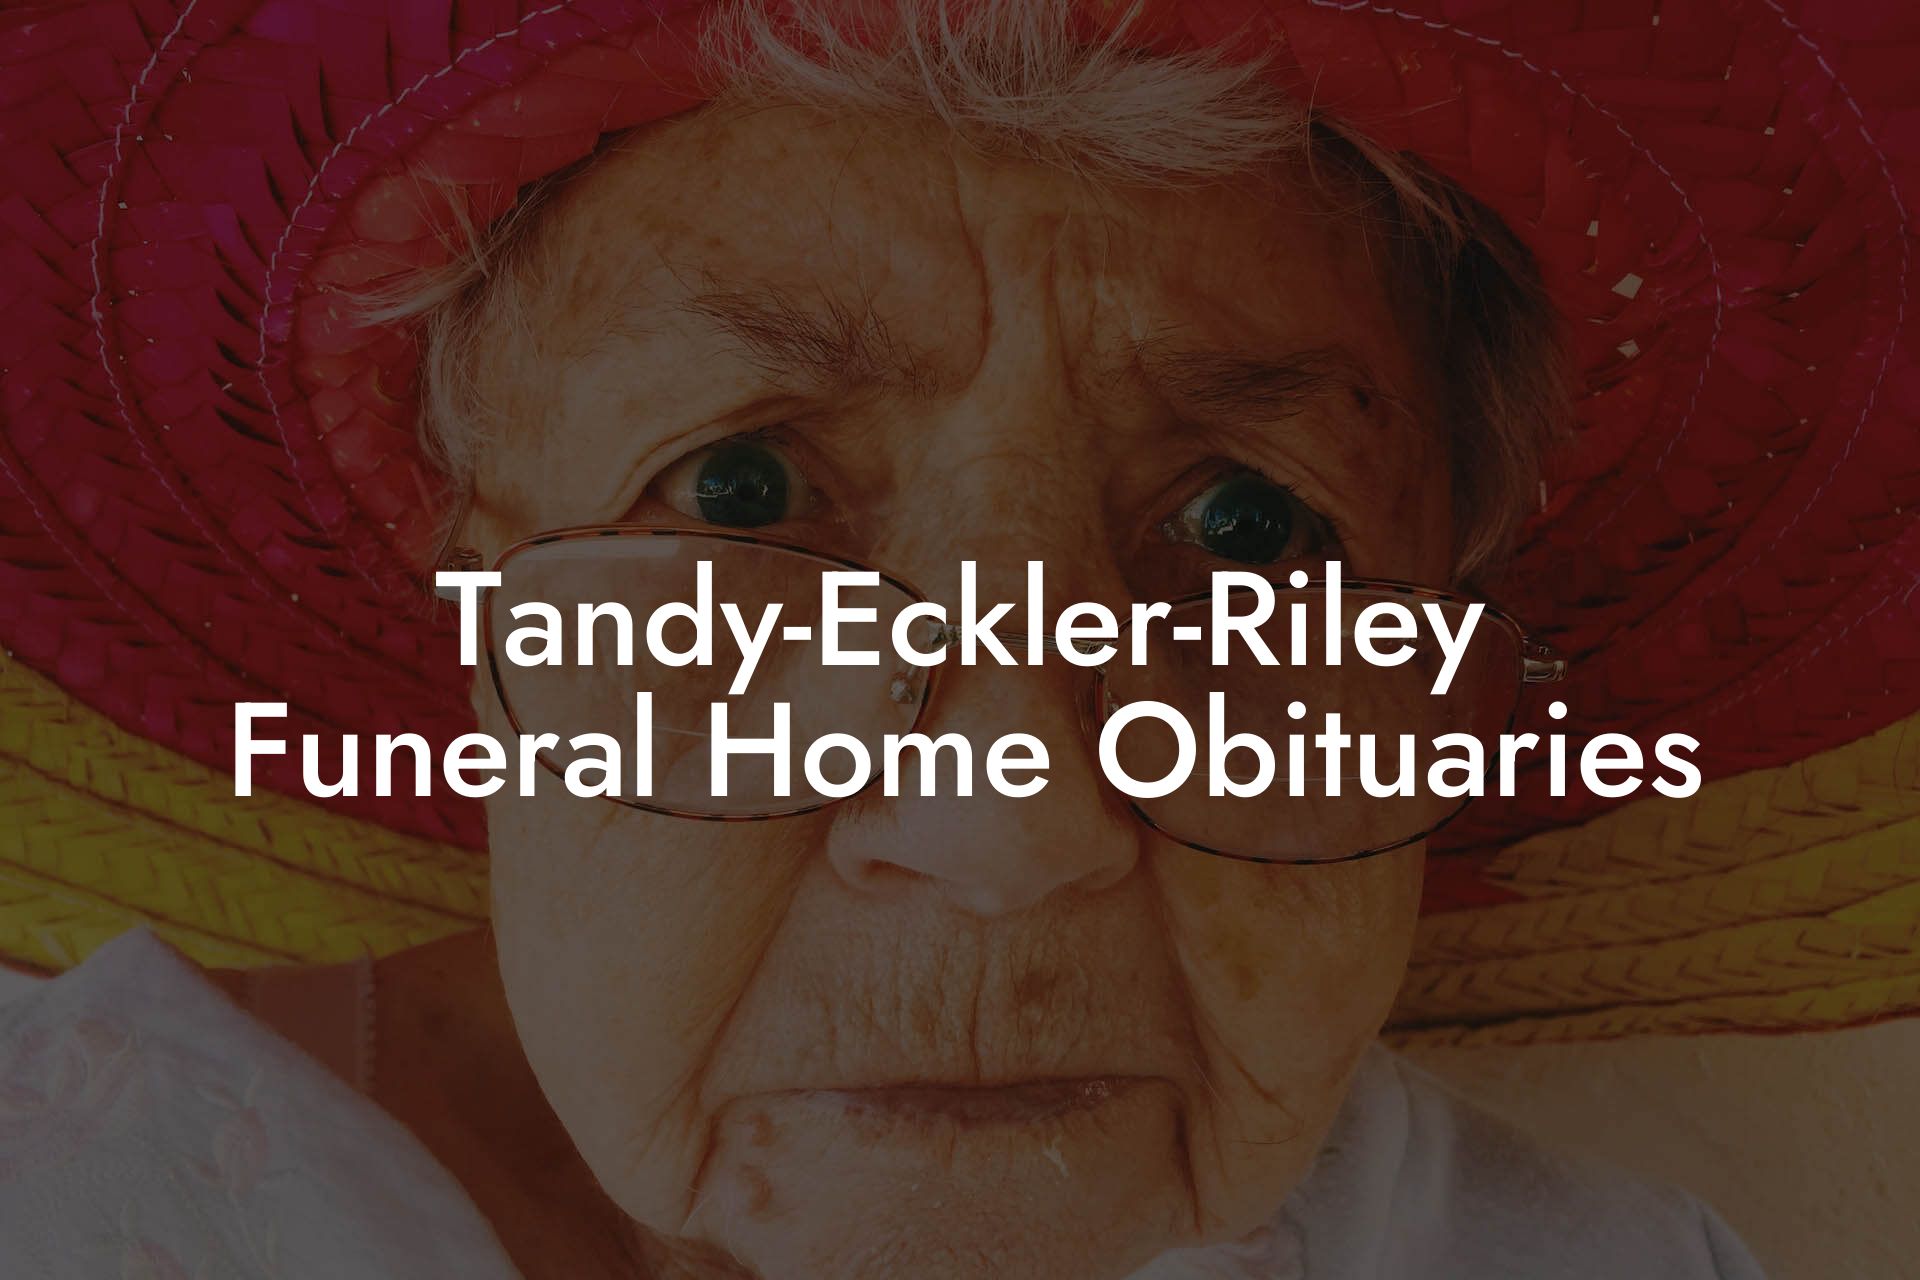 Tandy-Eckler-Riley Funeral Home Obituaries